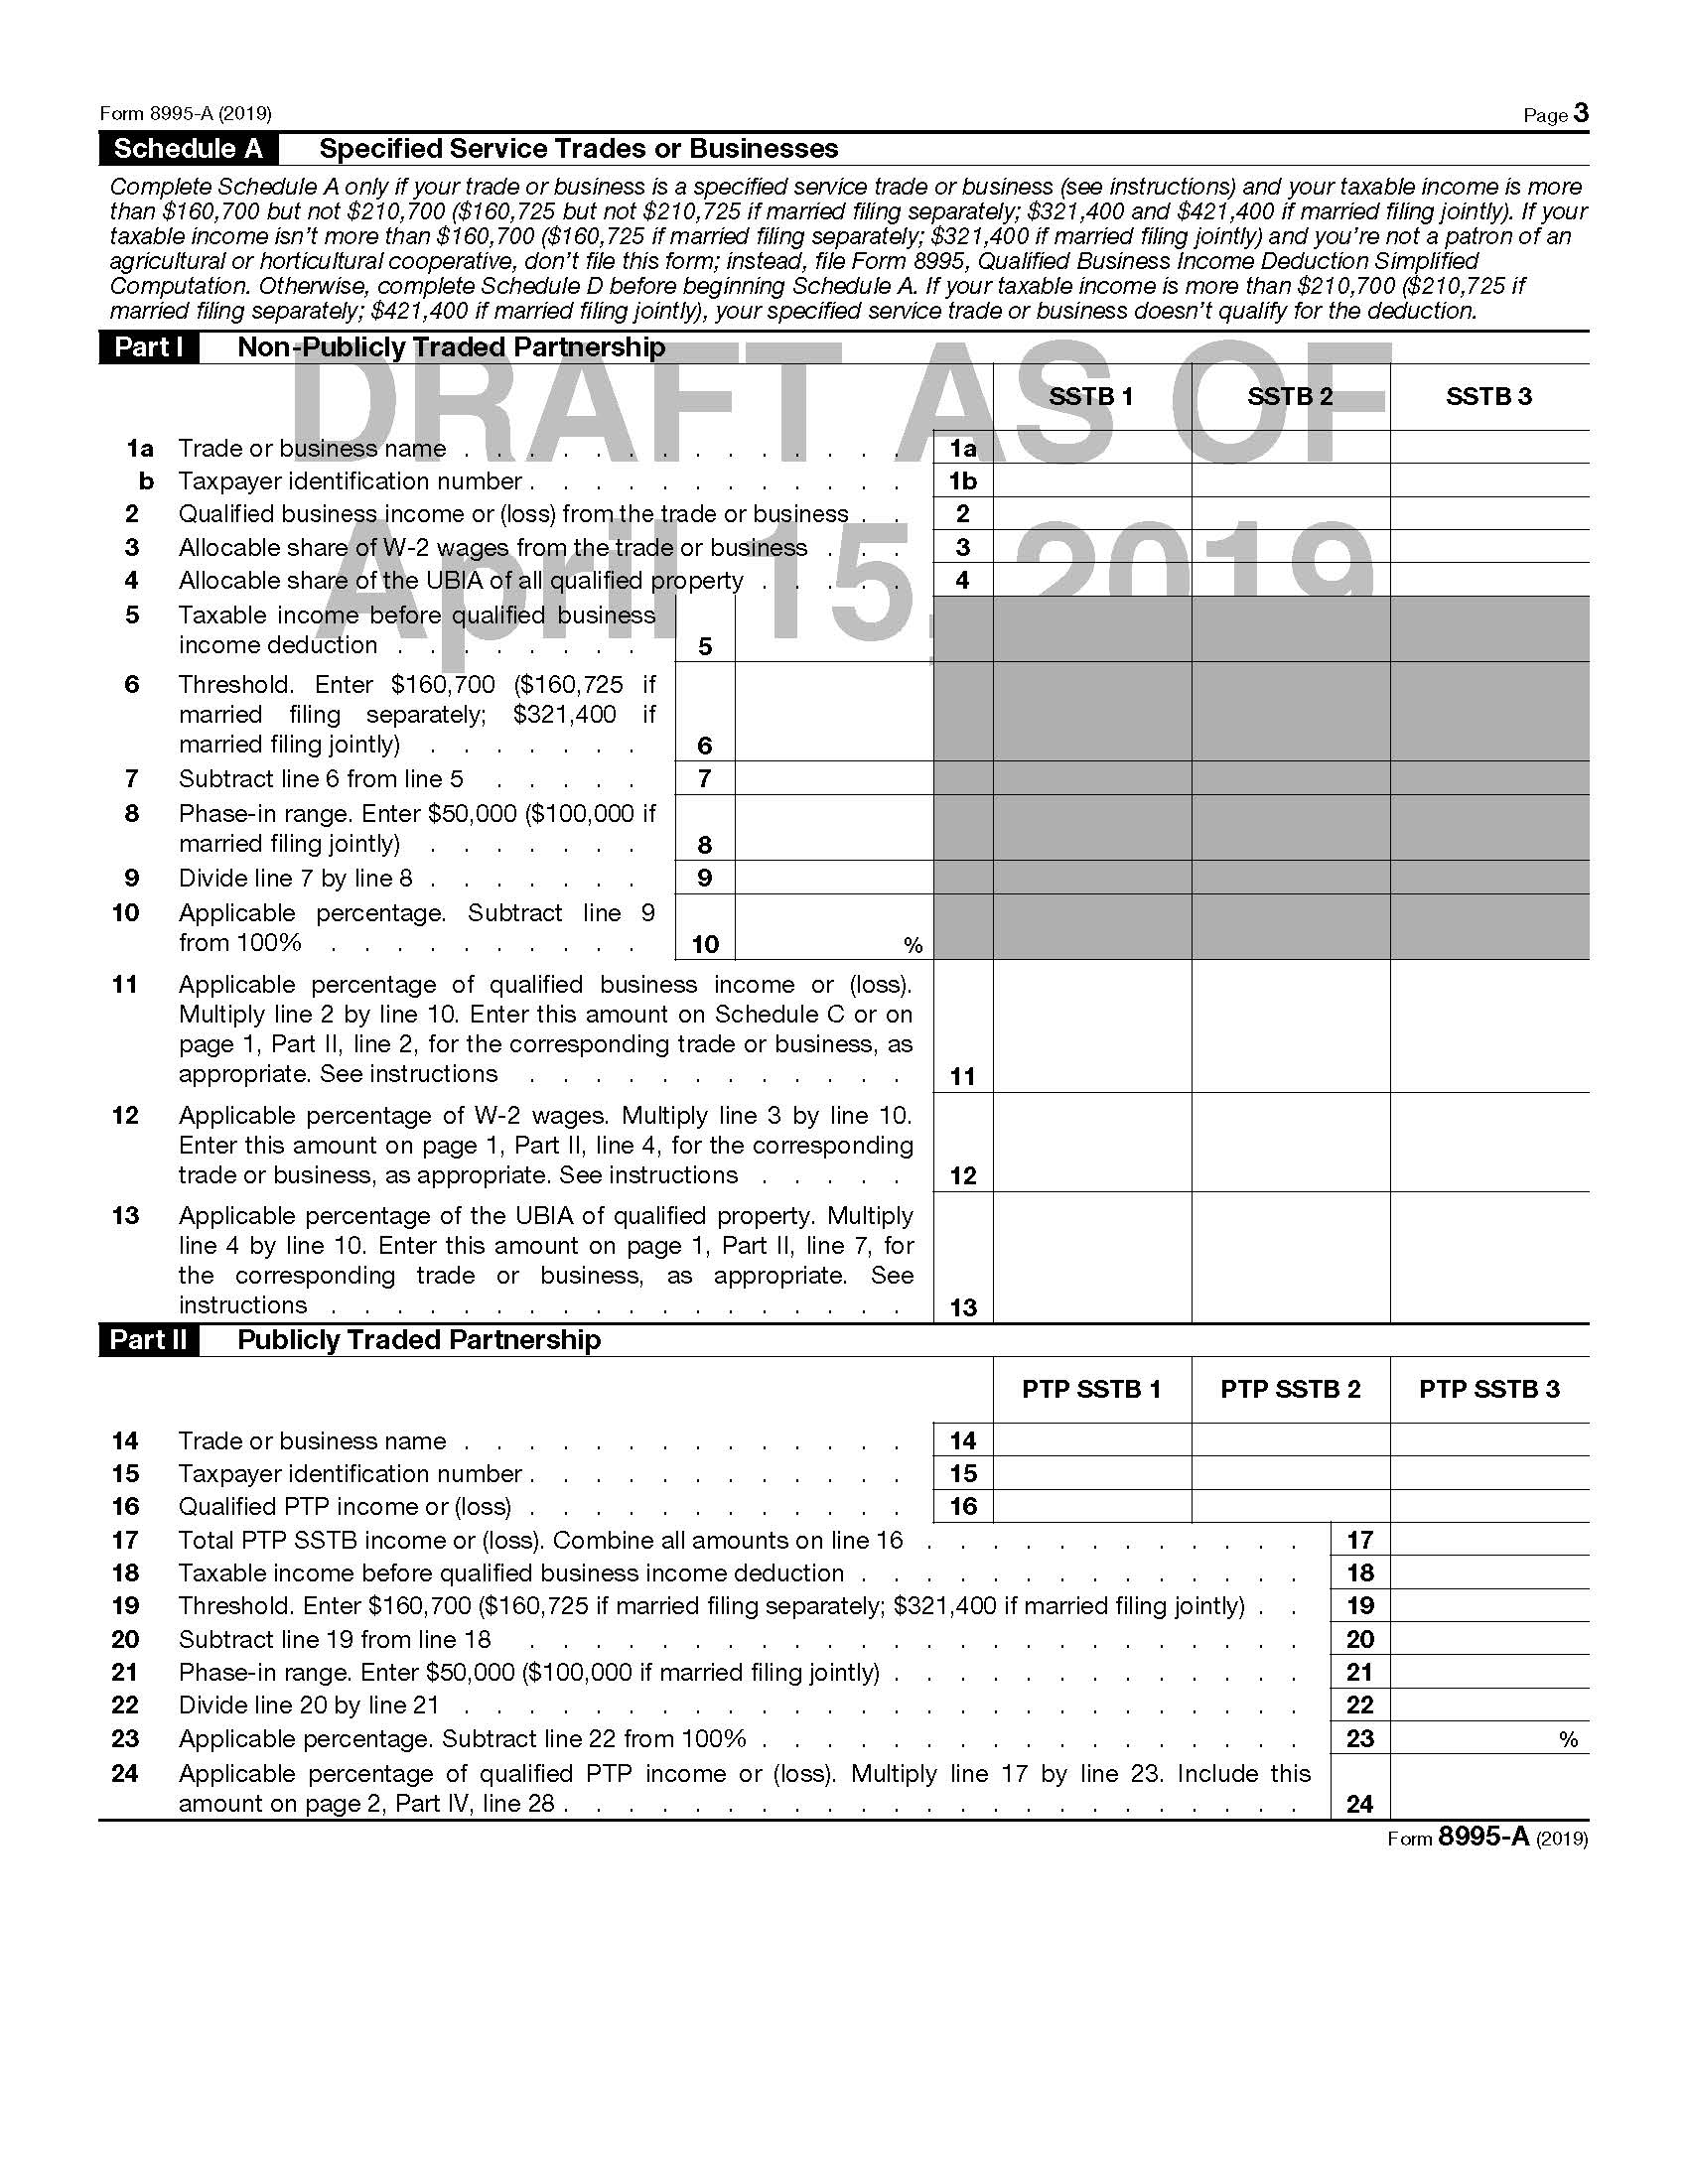 IRS Releases Drafts of Forms to Be Used to Calculate §199A Deduction on